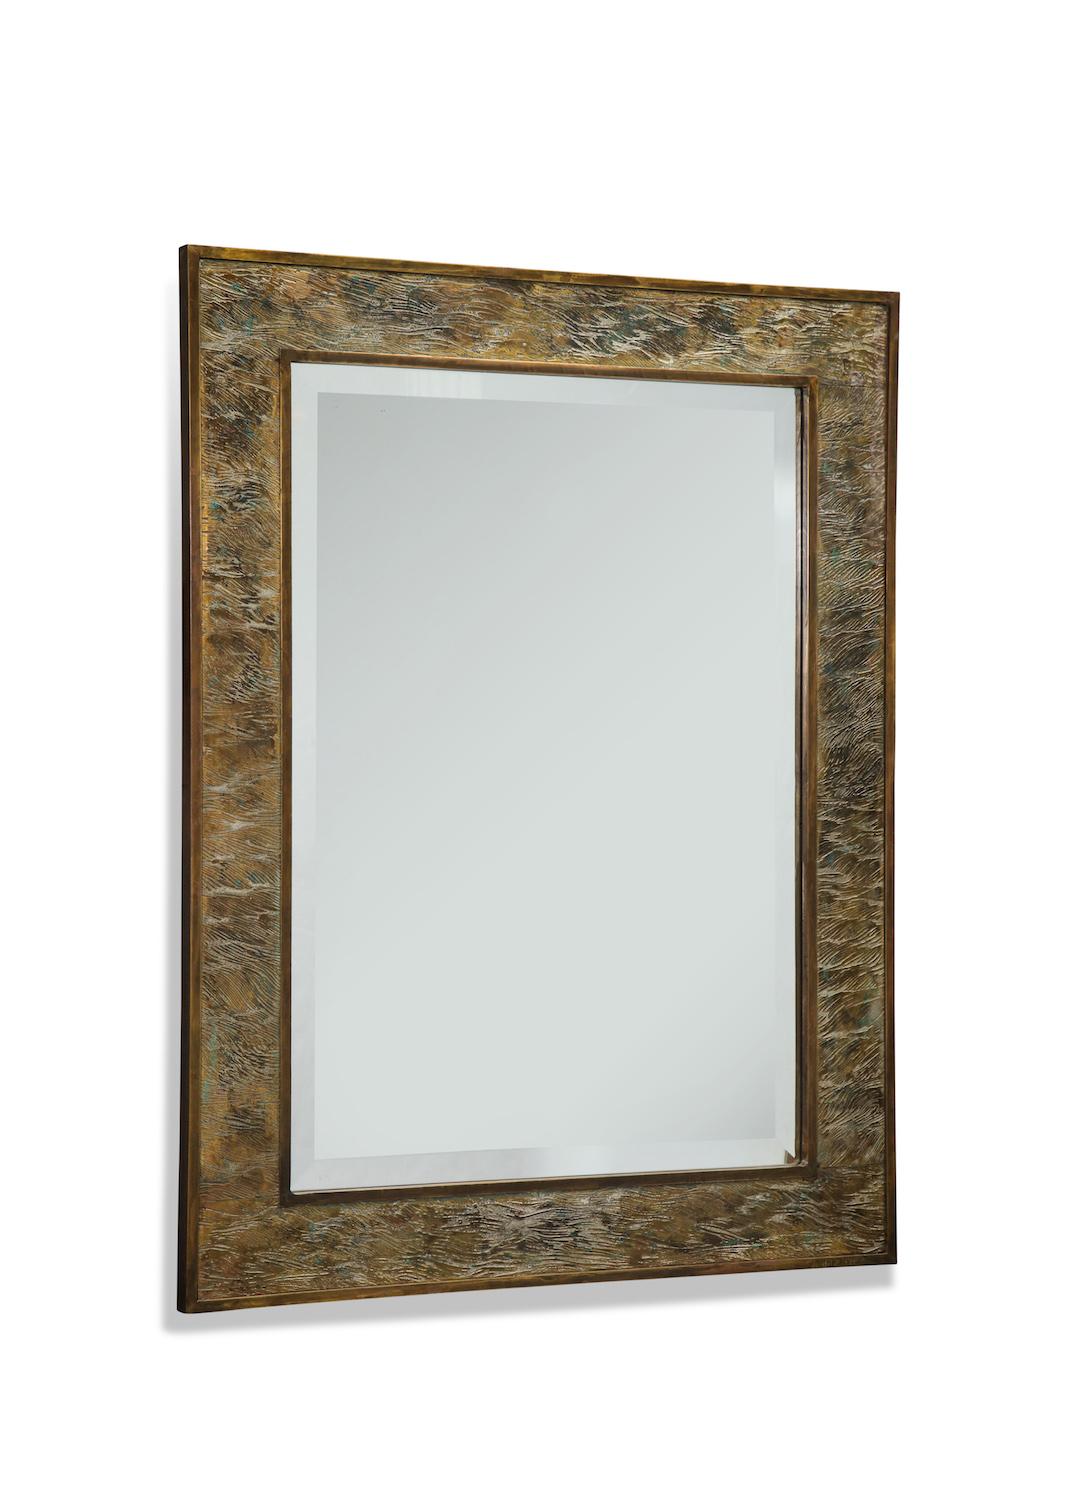 Fantastic rectangular mirror with bronze and pewter frame with incised lines depicting waves. A very rare model. Etched signature on lower face.